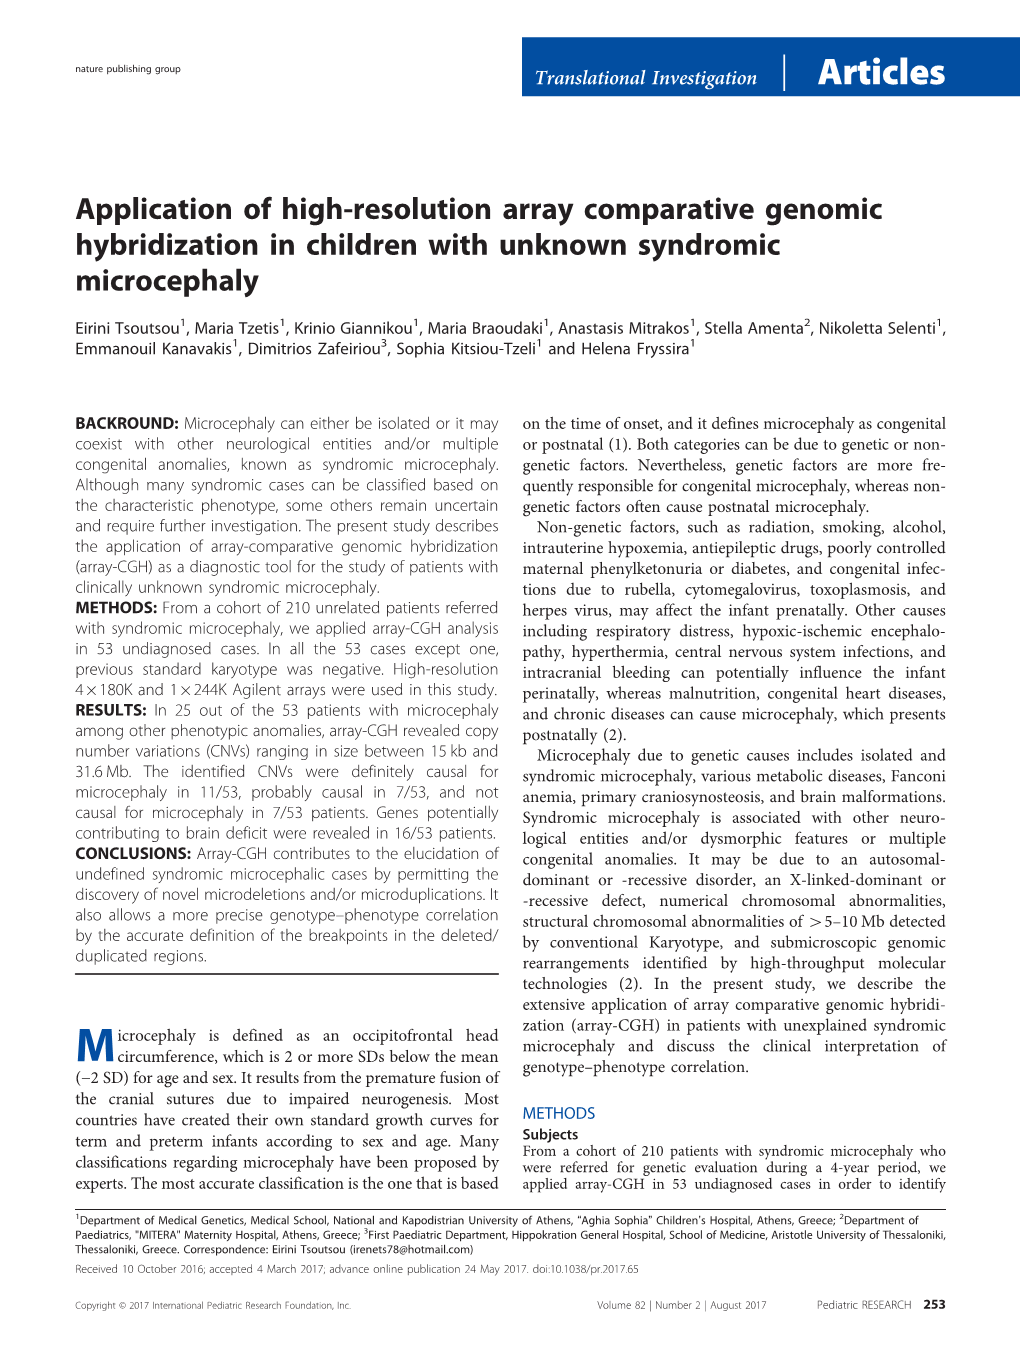 Application of High-Resolution Array Comparative Genomic Hybridization in Children with Unknown Syndromic Microcephaly